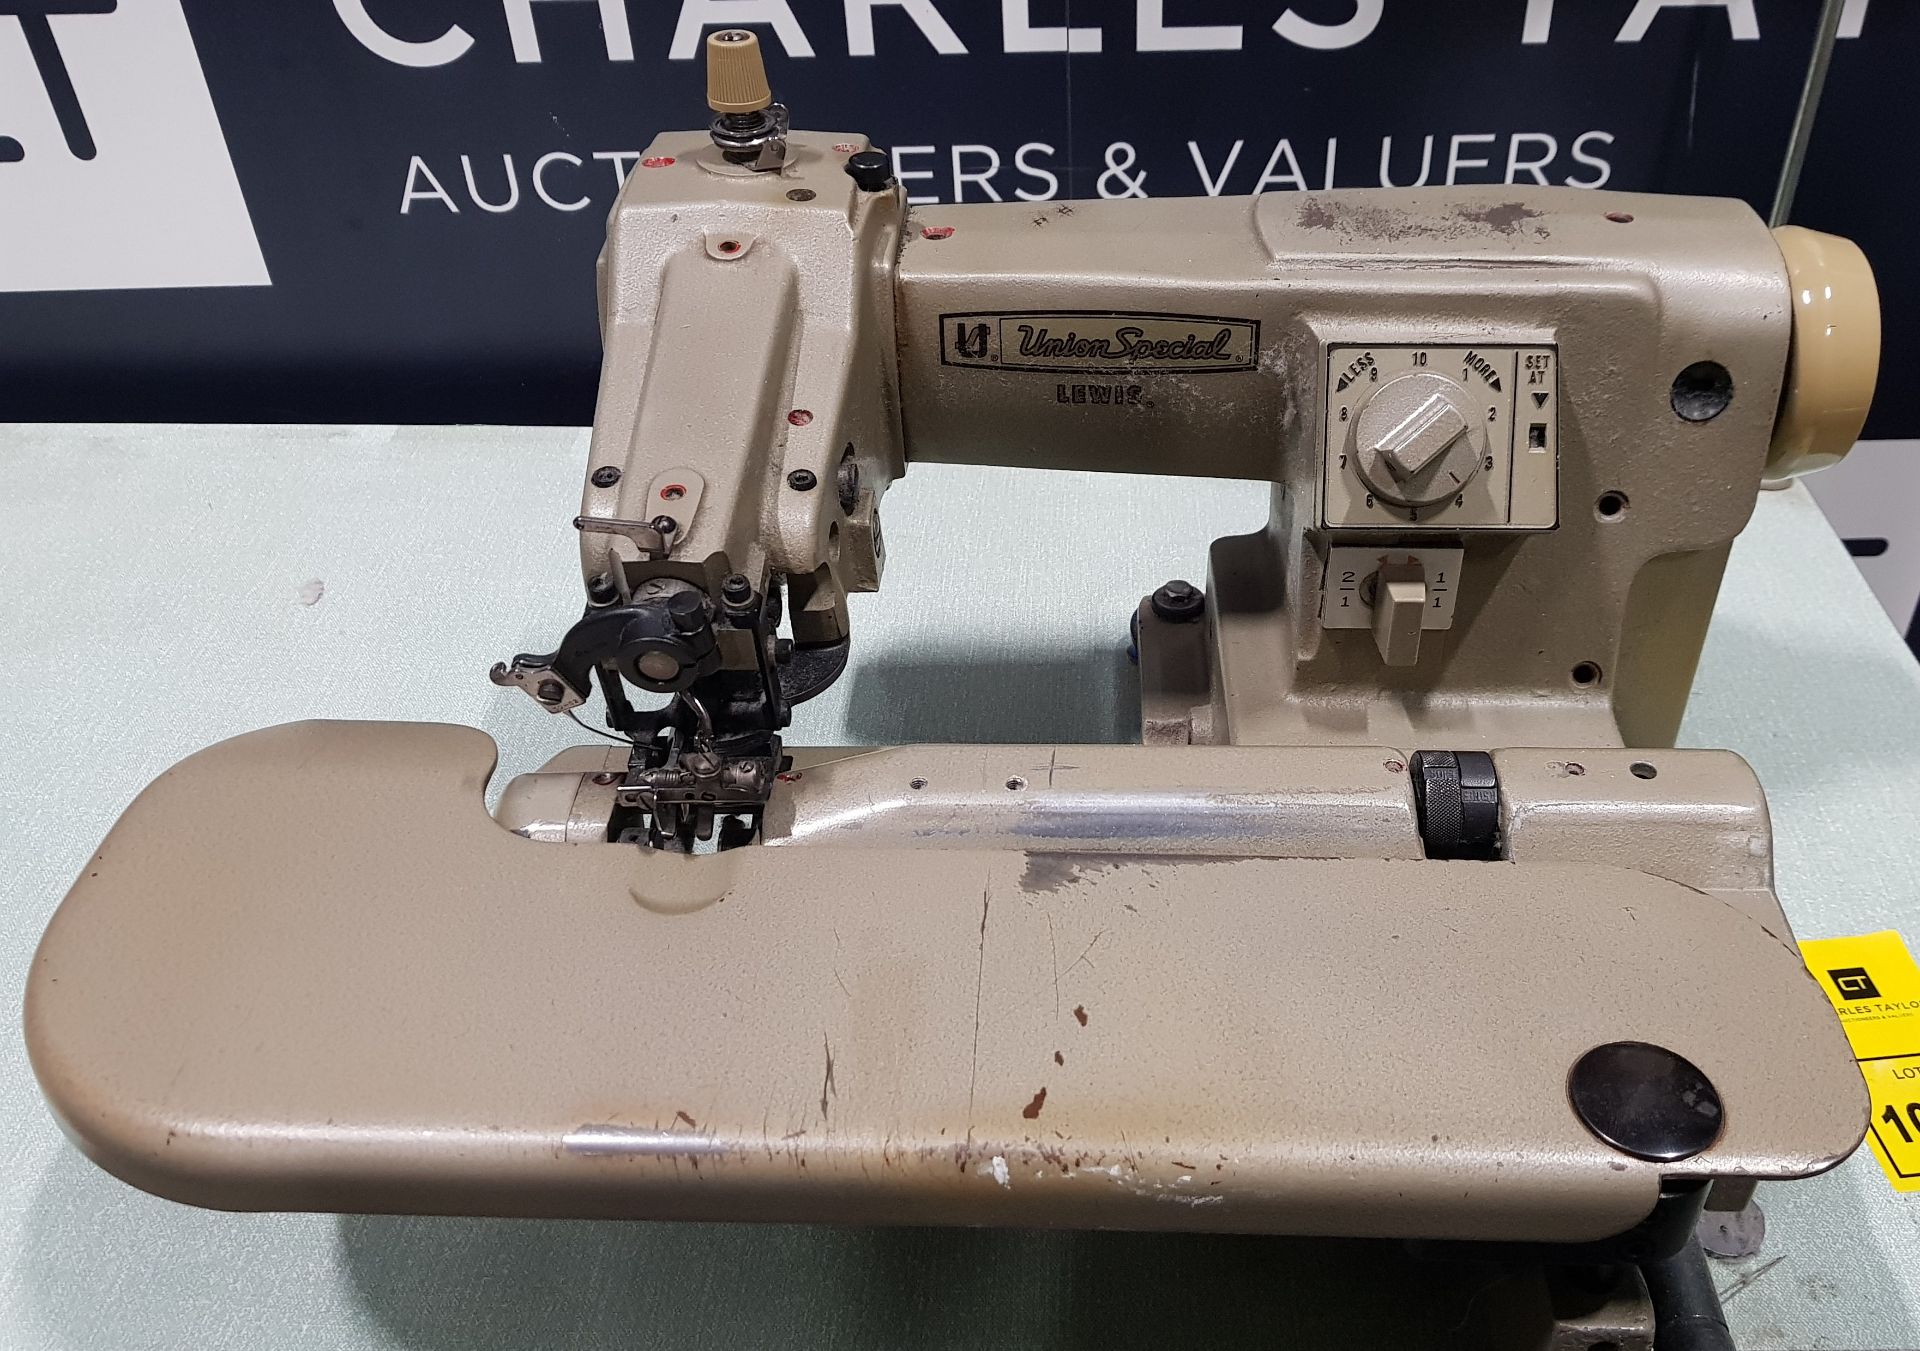 1 X UNION SPECIAL 37500 BLIND STITCH SEWING MACHINE 100CM H X 105CM W X 50CM D CHAIR INCLUDED - Image 2 of 2